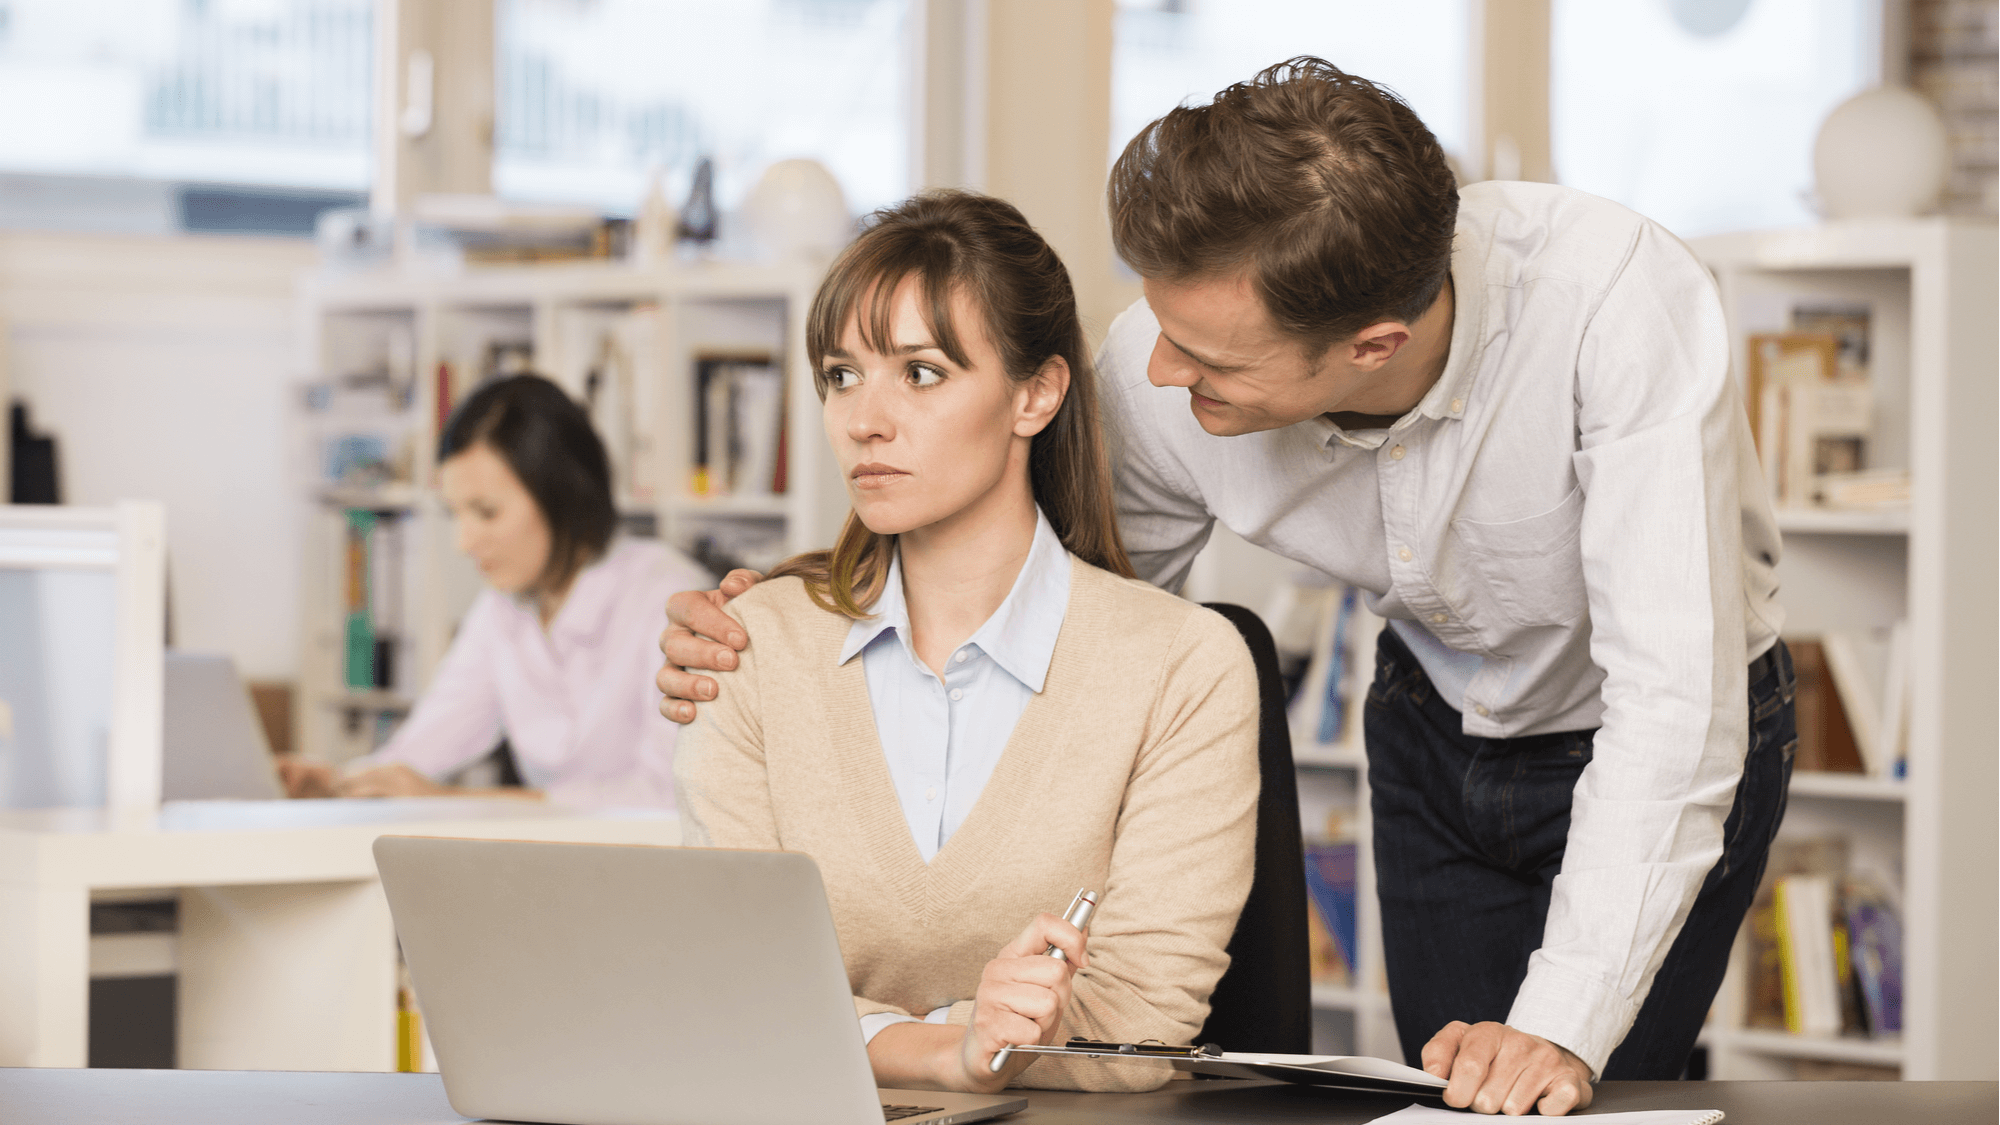 Sexual Harassment at Workplace Training